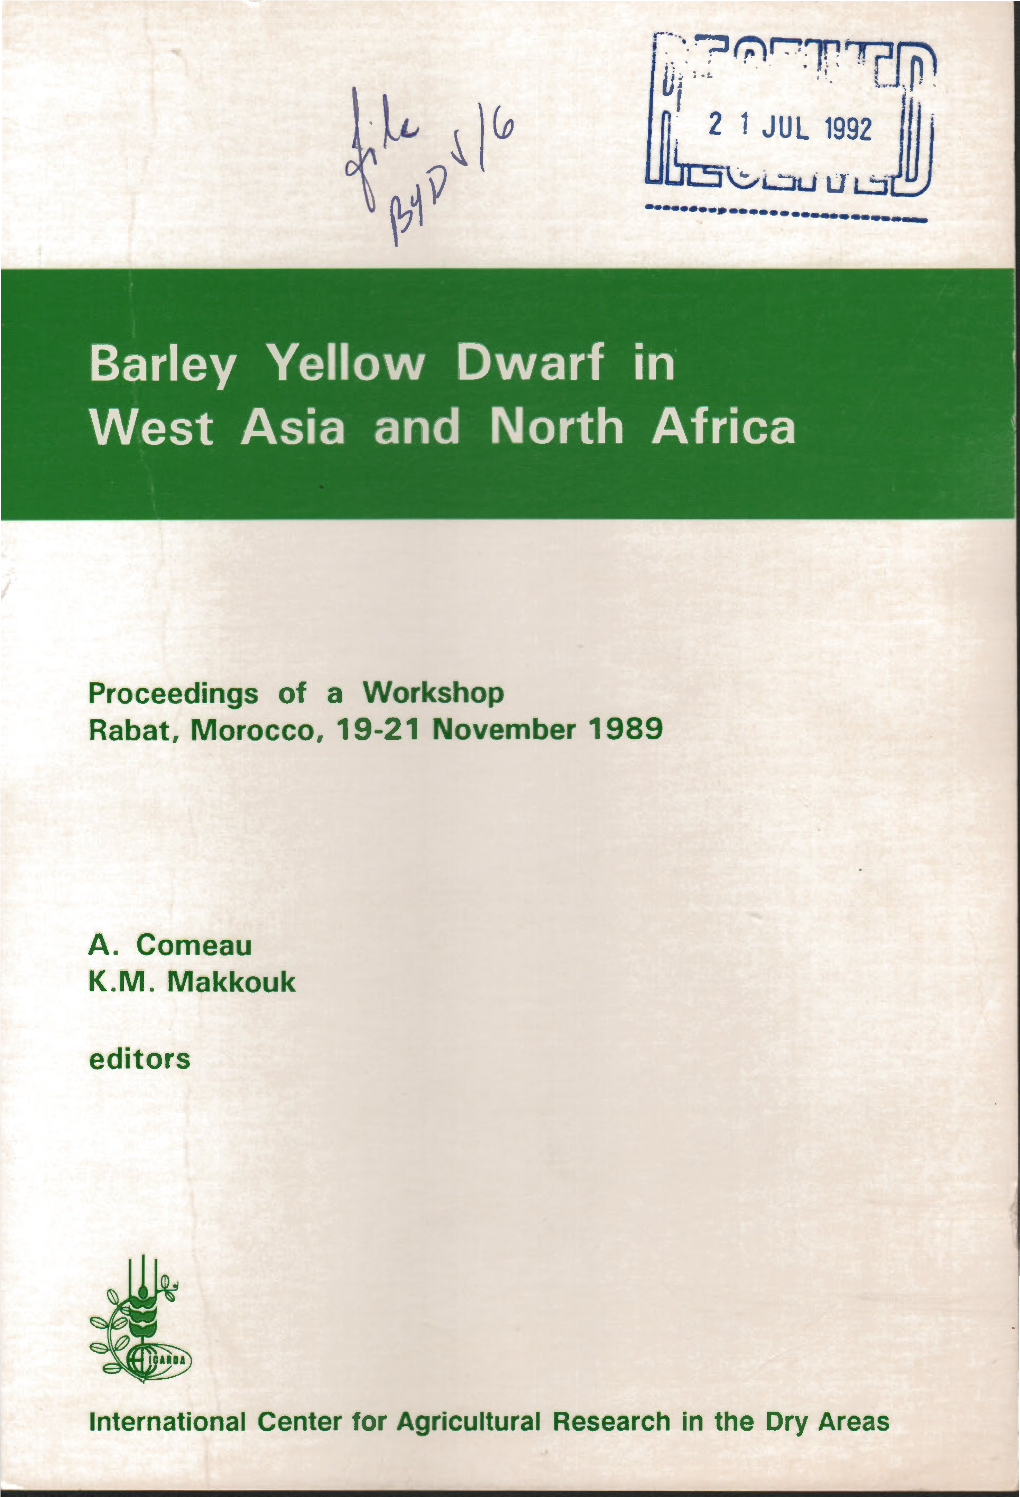 Barley Yellow Dwarf in West Asia and North Africa